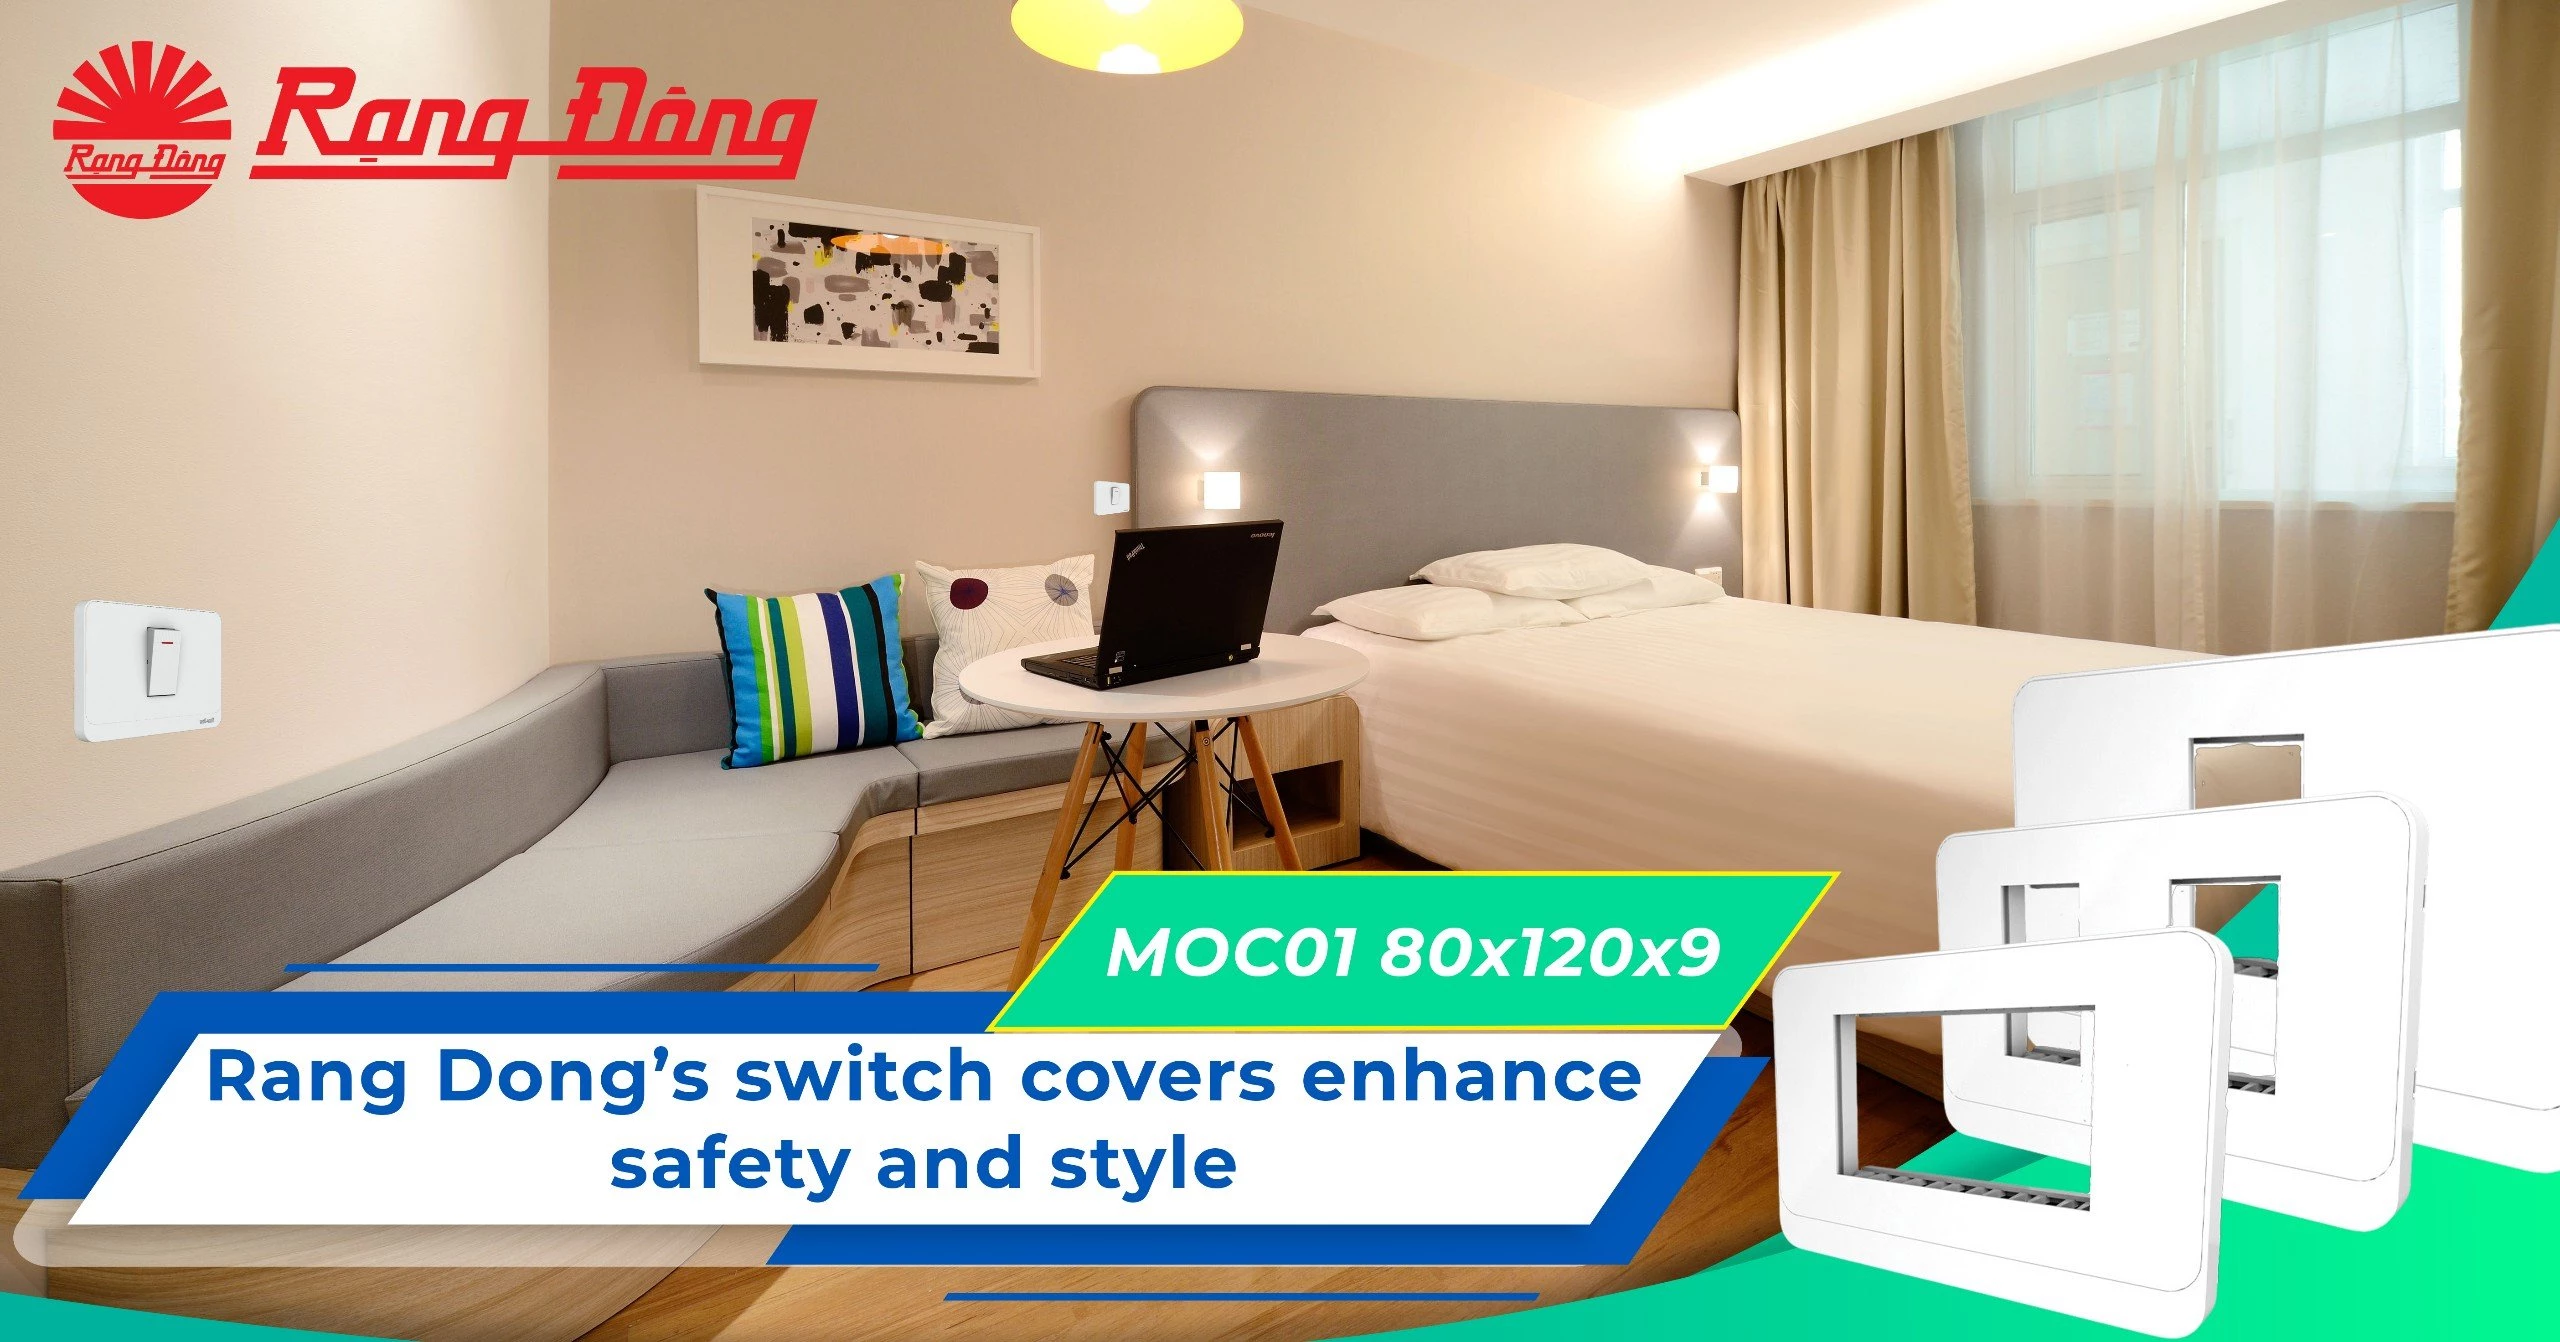 Rang Dong’s switch covers enhance safety and style